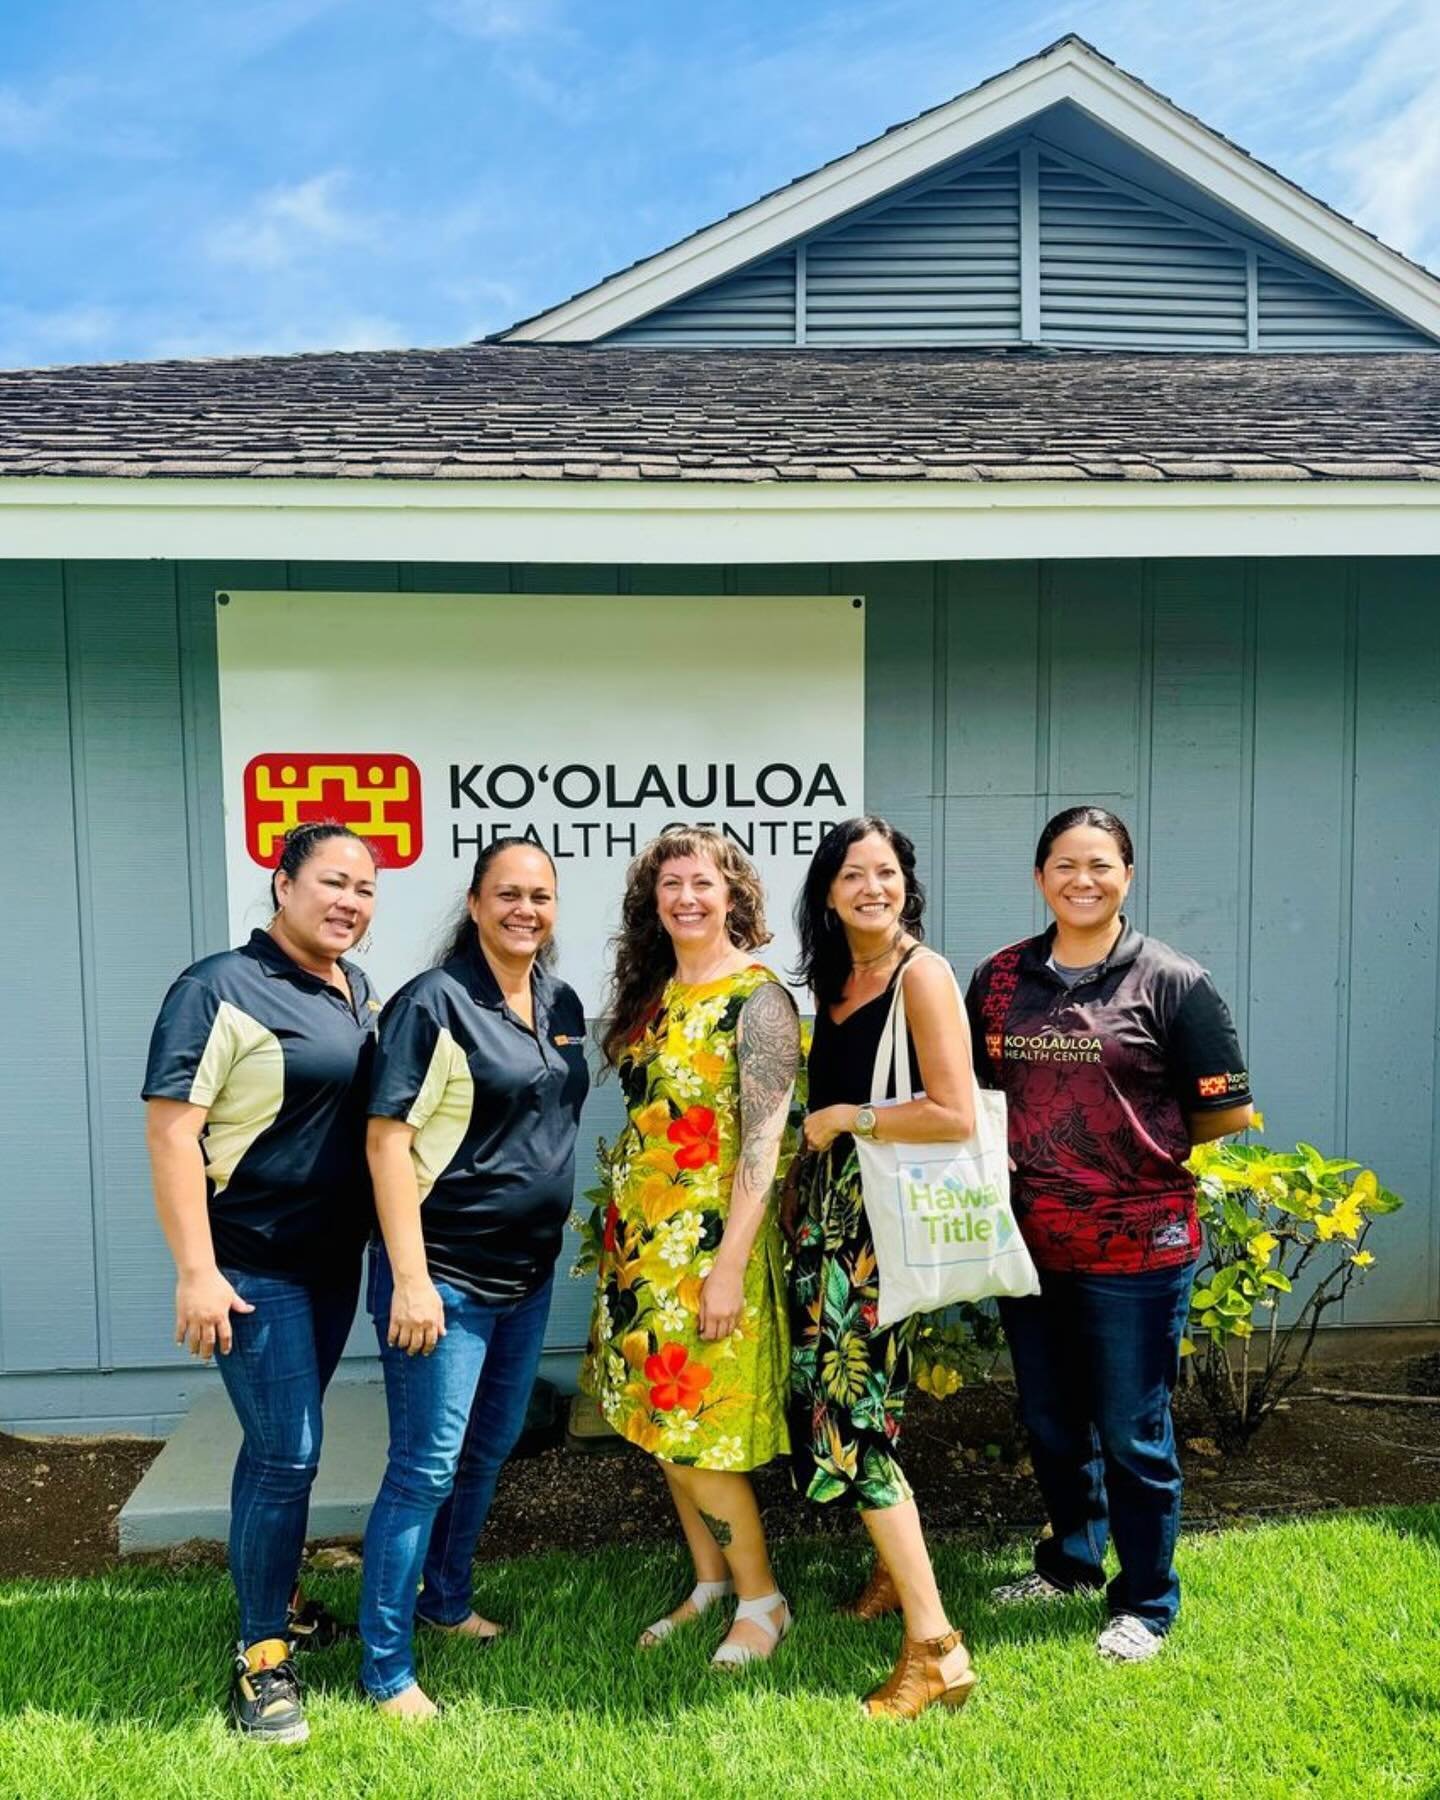 Aloha &lsquo;Ohana!

Mahalo @essnaccesshlth for the kind words! We see you!

Essential Access Health&rsquo;s wonderful post:

&ldquo;We share Ko&rsquo;olauloa&rsquo;s belief that health care is a right, not a privilege. We were inspired to hear how #